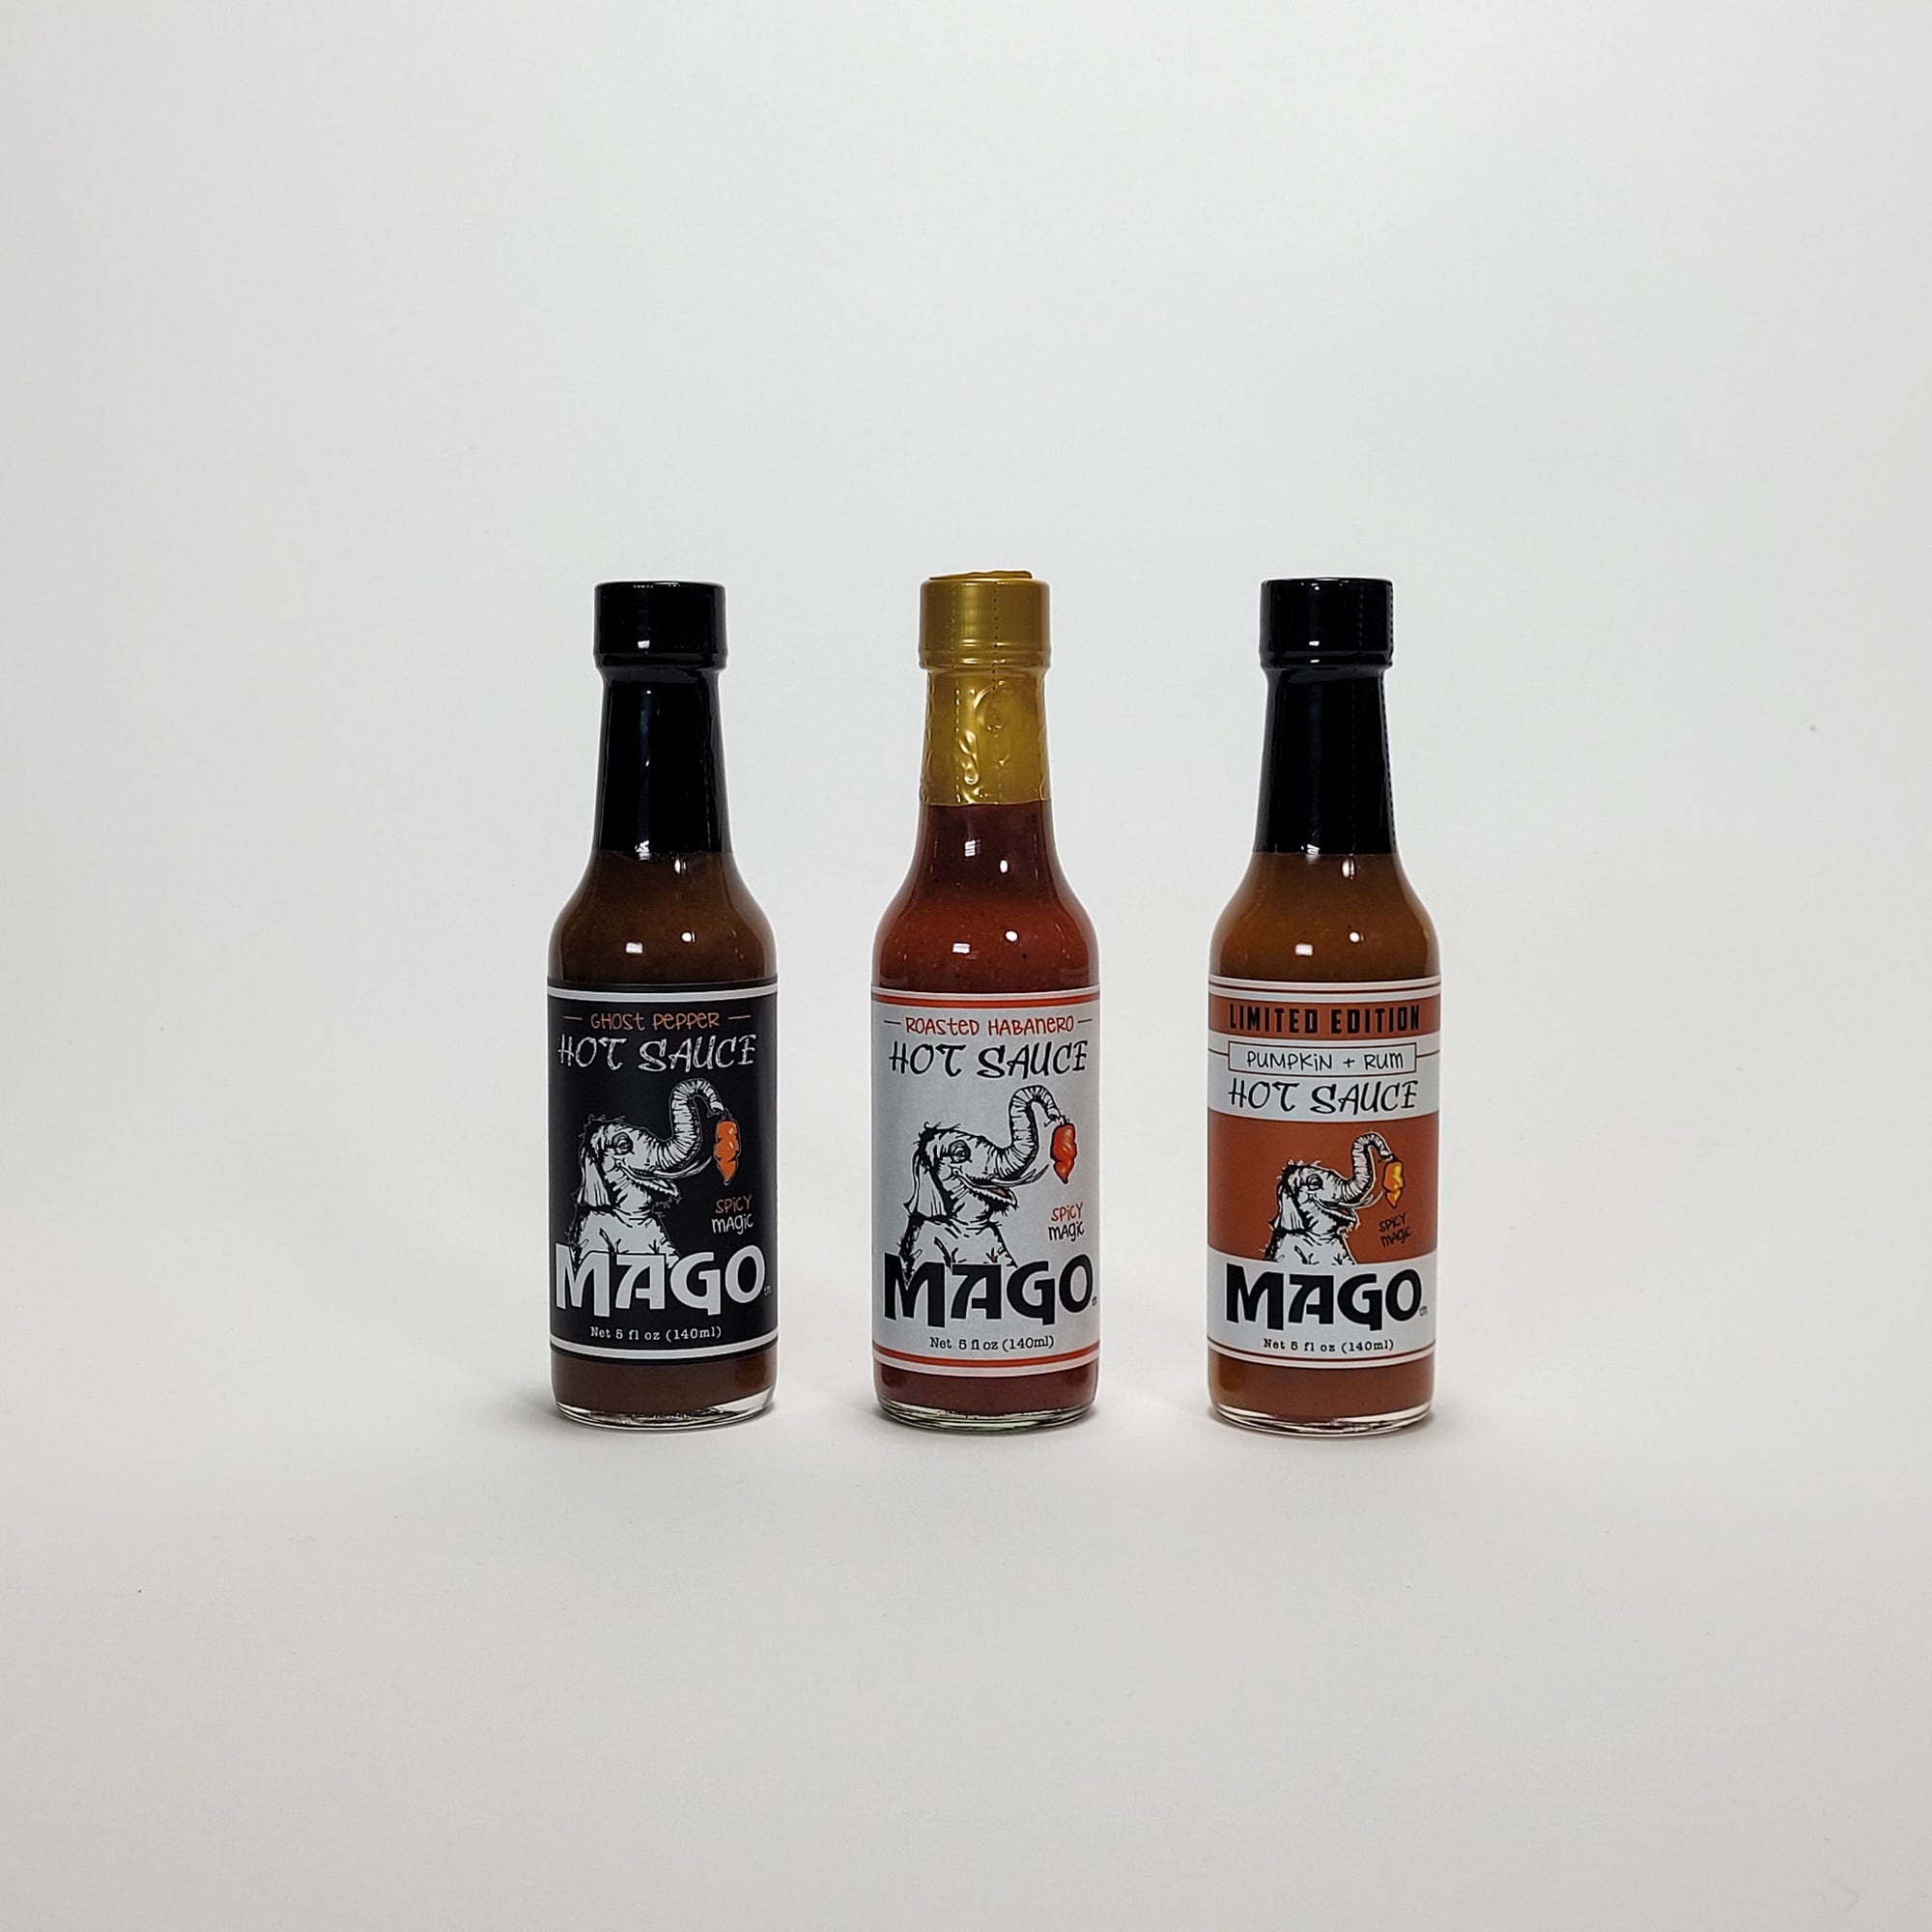 Mago hot sauce collection